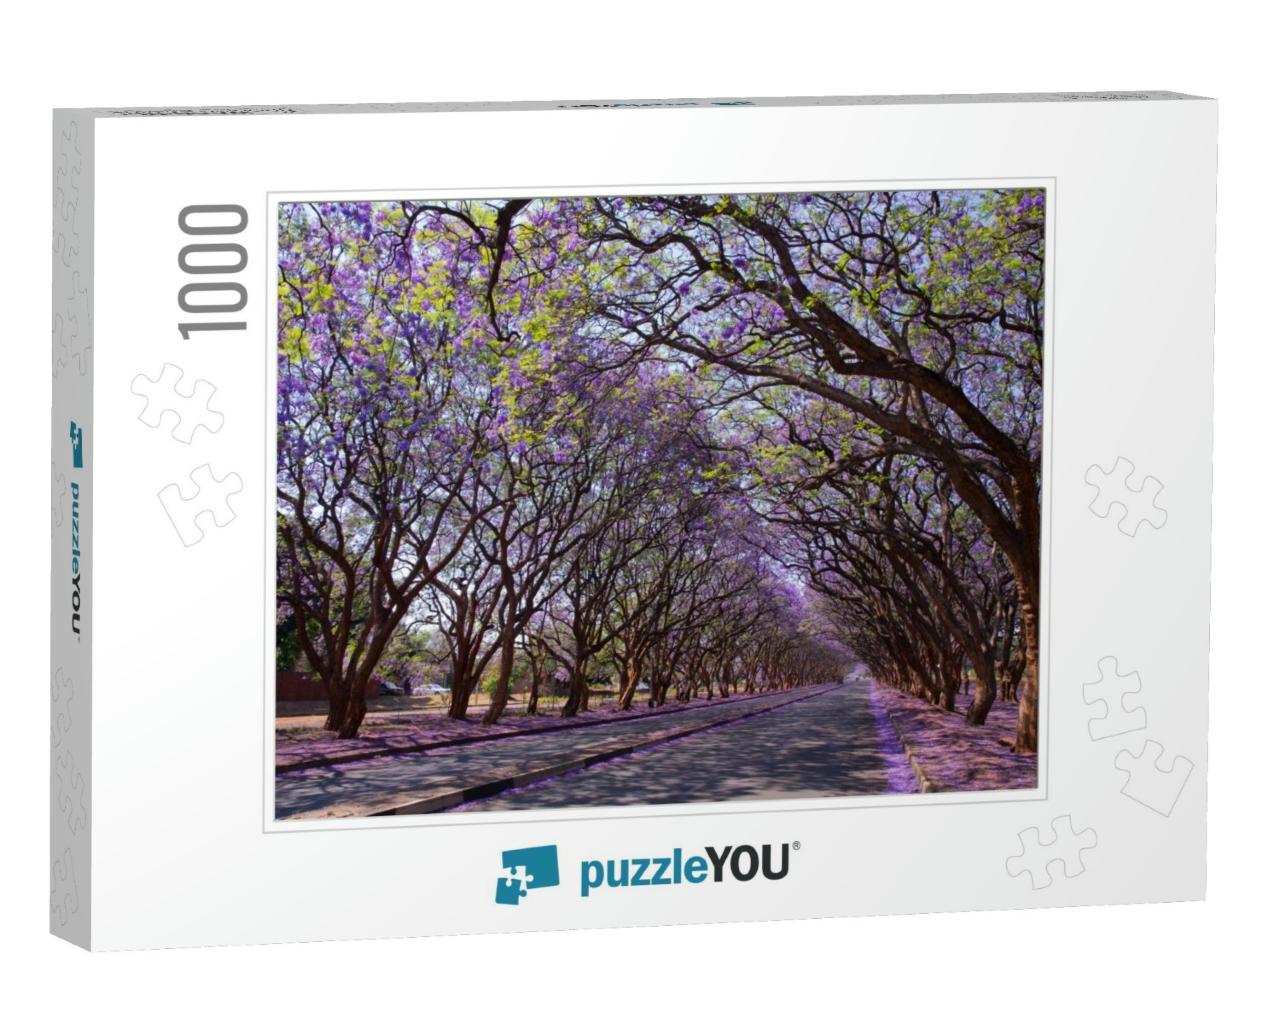 Blooming Jacaranda Trees Lining Milton Avenue, Harare, Zi... Jigsaw Puzzle with 1000 pieces